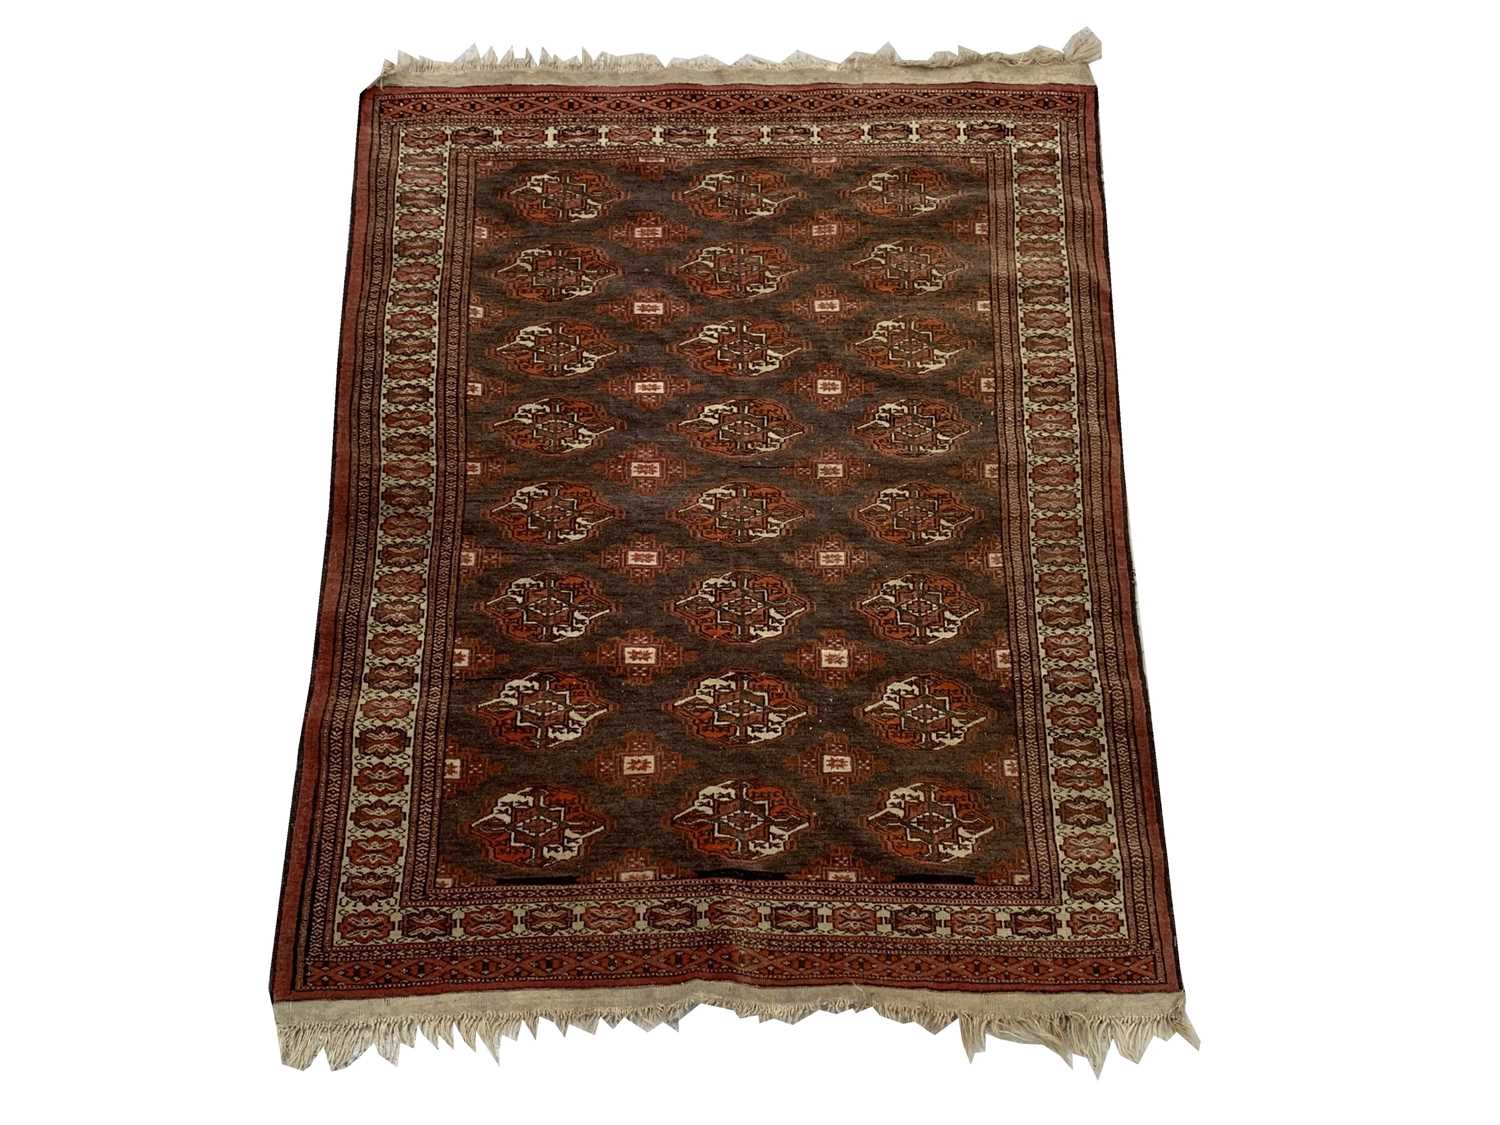 A Bokhara rug, early 20th century, the brown field with eight rows of three medallionsand rows of